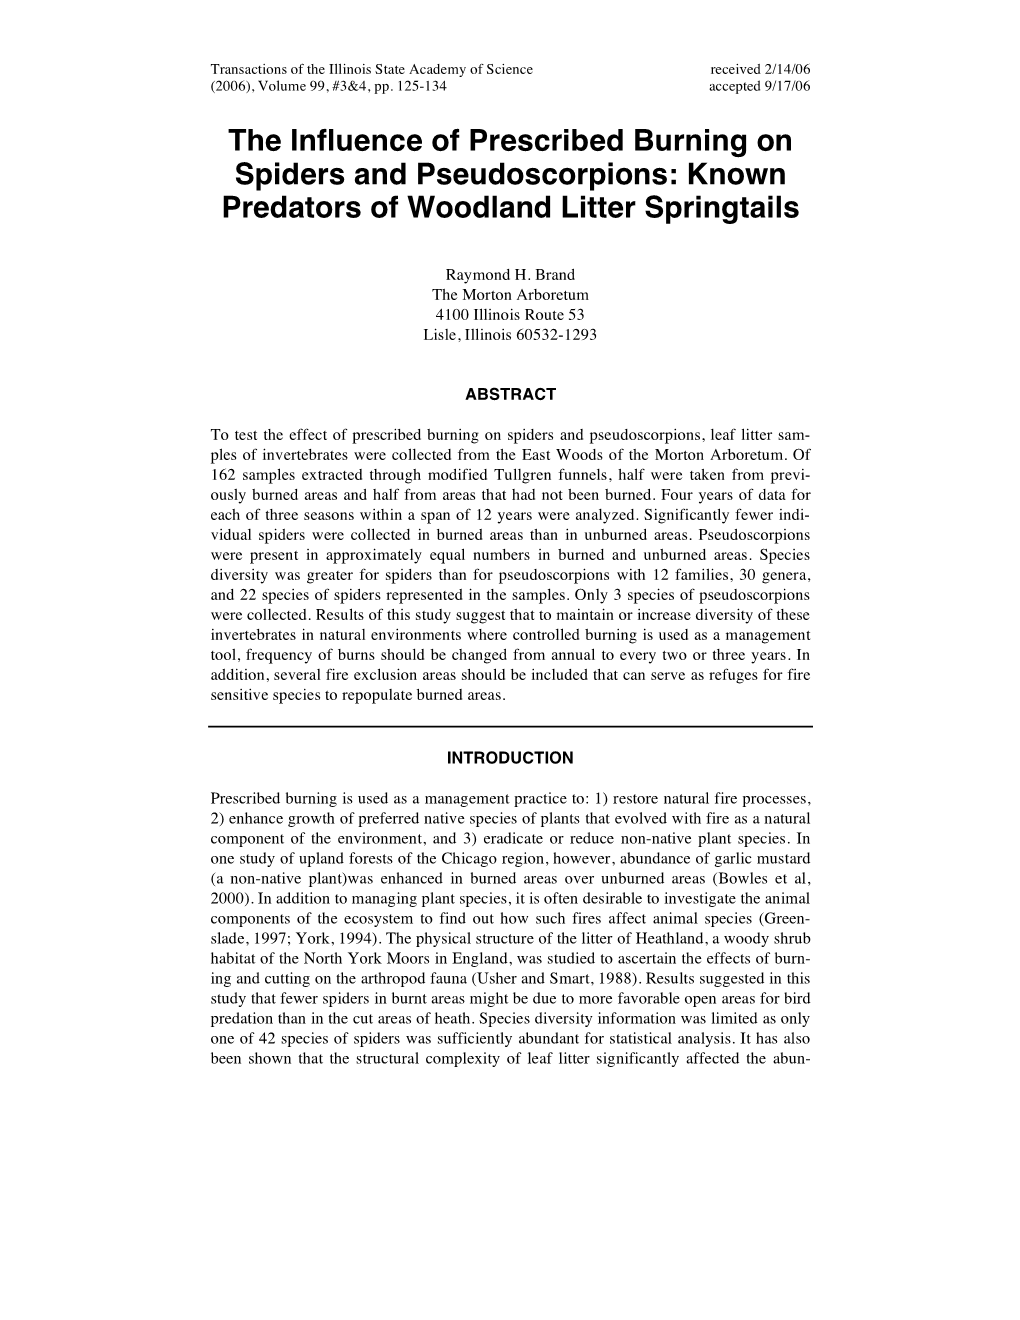 The Influence of Prescribed Burning on Spiders and Pseudoscorpions: Known Predators of Woodland Litter Springtails